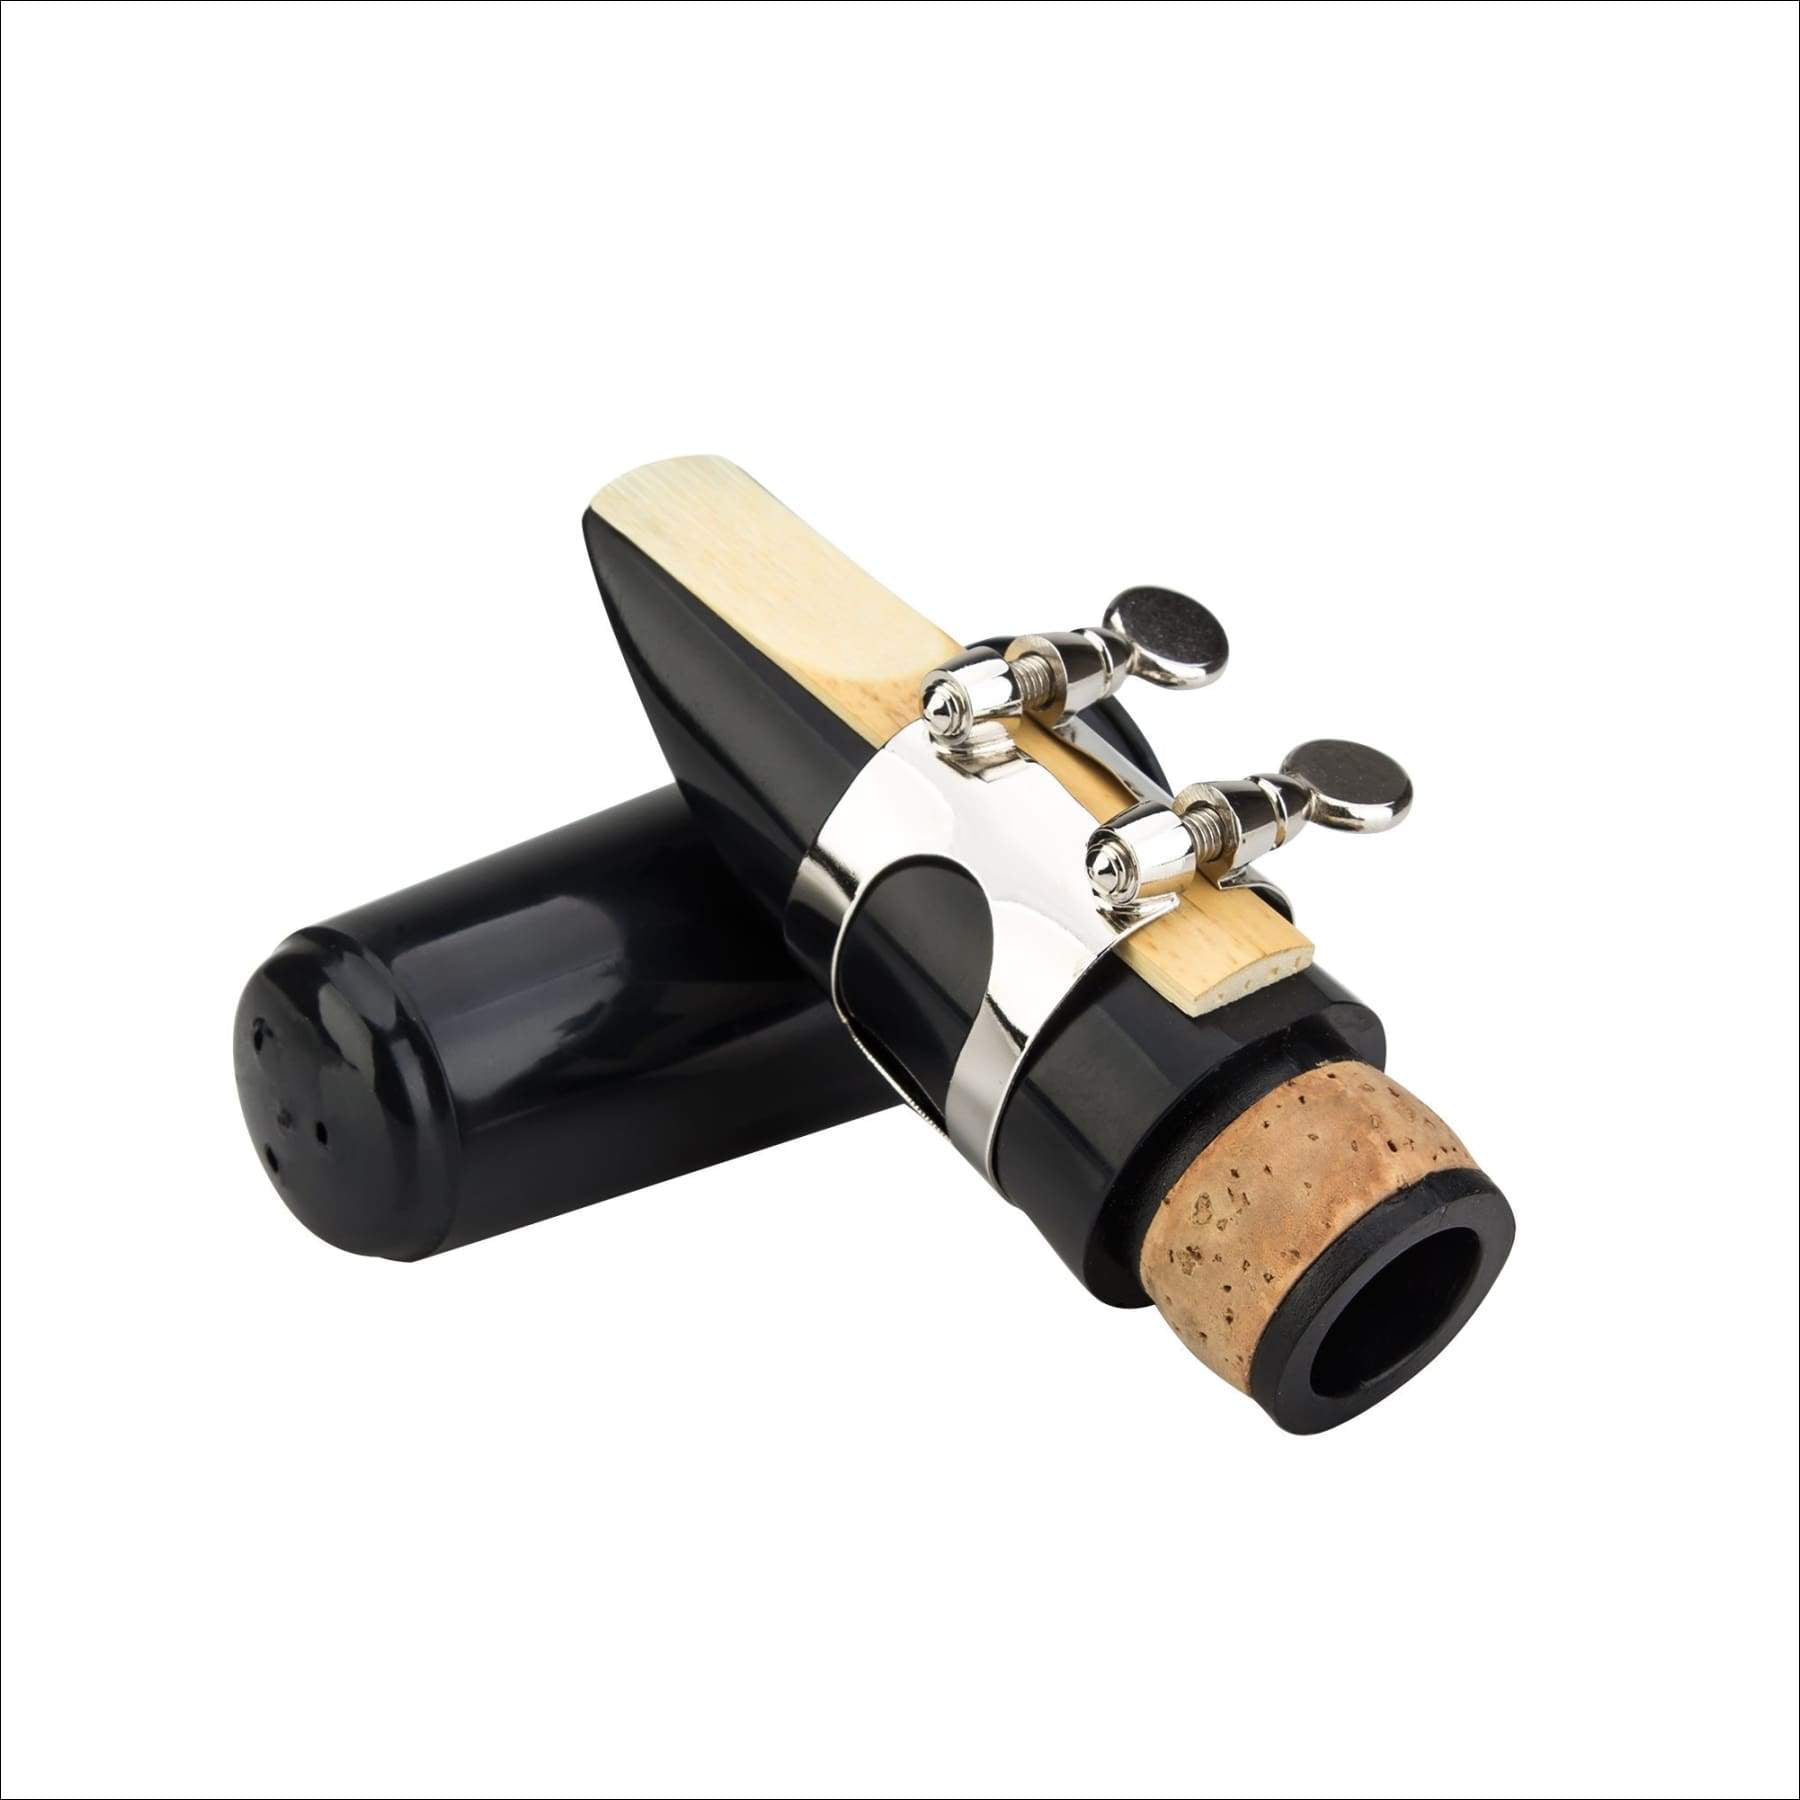 Glory Clarinet Mouthpiece Kit with Ligature,one Reed and Plastic Cap